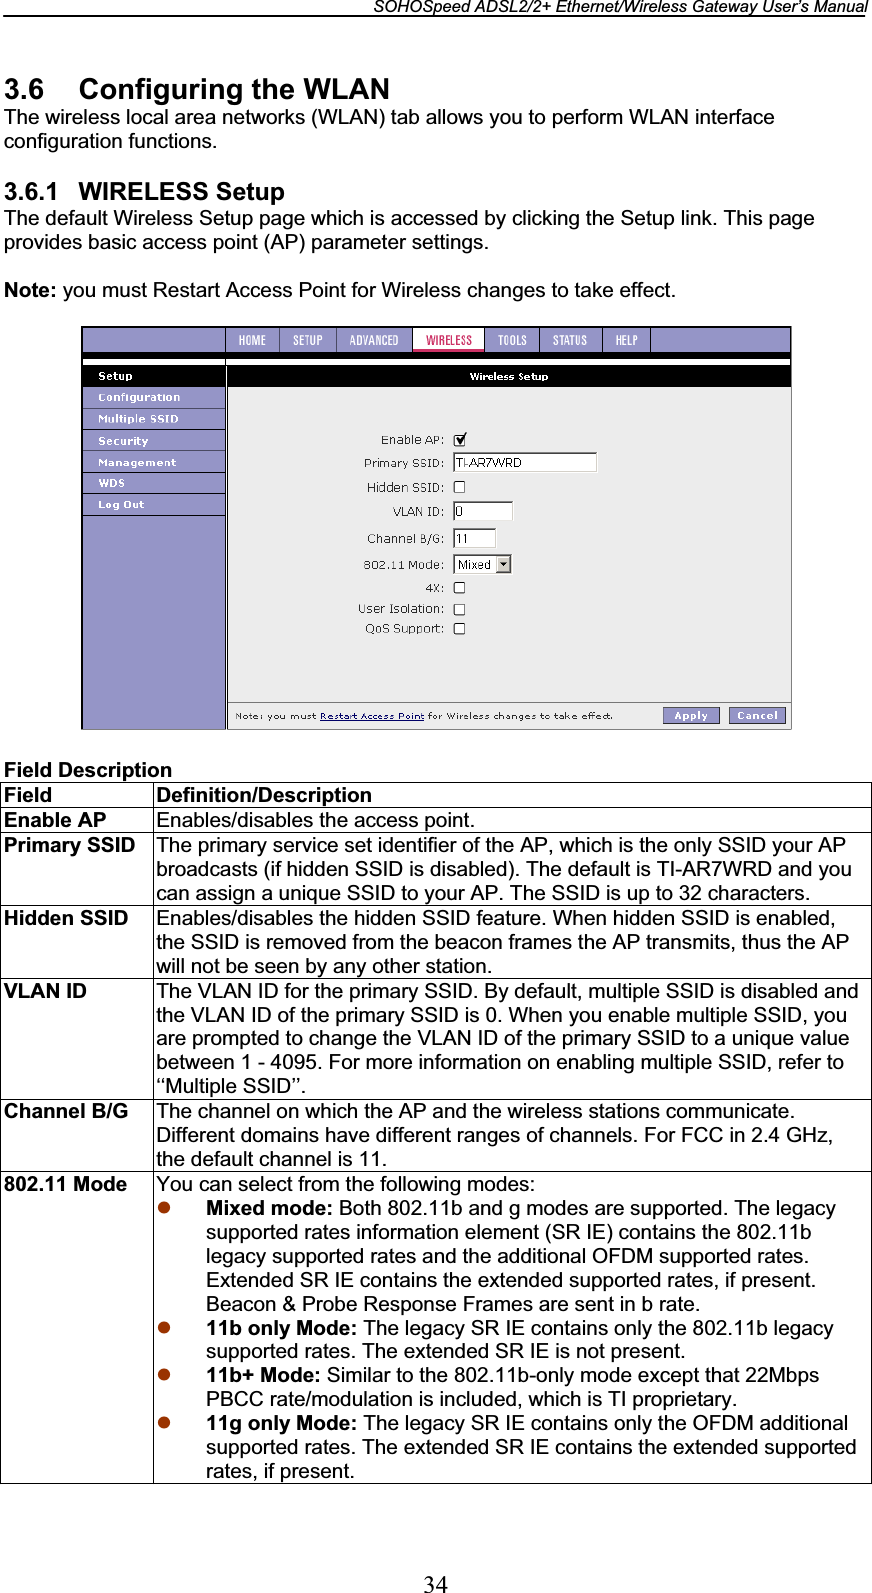 SOHOSpeed ADSL2/2+ Ethernet/Wireless Gateway User’s Manual 343.6 Configuring the WLAN The wireless local area networks (WLAN) tab allows you to perform WLAN interface configuration functions. 3.6.1 WIRELESS Setup The default Wireless Setup page which is accessed by clicking the Setup link. This page provides basic access point (AP) parameter settings. Note: you must Restart Access Point for Wireless changes to take effect. Field Description Field Definition/Description Enable AP  Enables/disables the access point. Primary SSID  The primary service set identifier of the AP, which is the only SSID your AP broadcasts (if hidden SSID is disabled). The default is TI-AR7WRD and you can assign a unique SSID to your AP. The SSID is up to 32 characters. Hidden SSID  Enables/disables the hidden SSID feature. When hidden SSID is enabled, the SSID is removed from the beacon frames the AP transmits, thus the AP will not be seen by any other station. VLAN ID  The VLAN ID for the primary SSID. By default, multiple SSID is disabled and the VLAN ID of the primary SSID is 0. When you enable multiple SSID, you are prompted to change the VLAN ID of the primary SSID to a unique value between 1 - 4095. For more information on enabling multiple SSID, refer to ‘‘Multiple SSID’’. Channel B/G  The channel on which the AP and the wireless stations communicate. Different domains have different ranges of channels. For FCC in 2.4 GHz, the default channel is 11. 802.11 Mode  You can select from the following modes: z Mixed mode: Both 802.11b and g modes are supported. The legacy supported rates information element (SR IE) contains the 802.11b legacy supported rates and the additional OFDM supported rates. Extended SR IE contains the extended supported rates, if present. Beacon &amp; Probe Response Frames are sent in b rate. z 11b only Mode: The legacy SR IE contains only the 802.11b legacy supported rates. The extended SR IE is not present. z 11b+ Mode: Similar to the 802.11b-only mode except that 22Mbps PBCC rate/modulation is included, which is TI proprietary. z 11g only Mode: The legacy SR IE contains only the OFDM additional supported rates. The extended SR IE contains the extended supported rates, if present. 